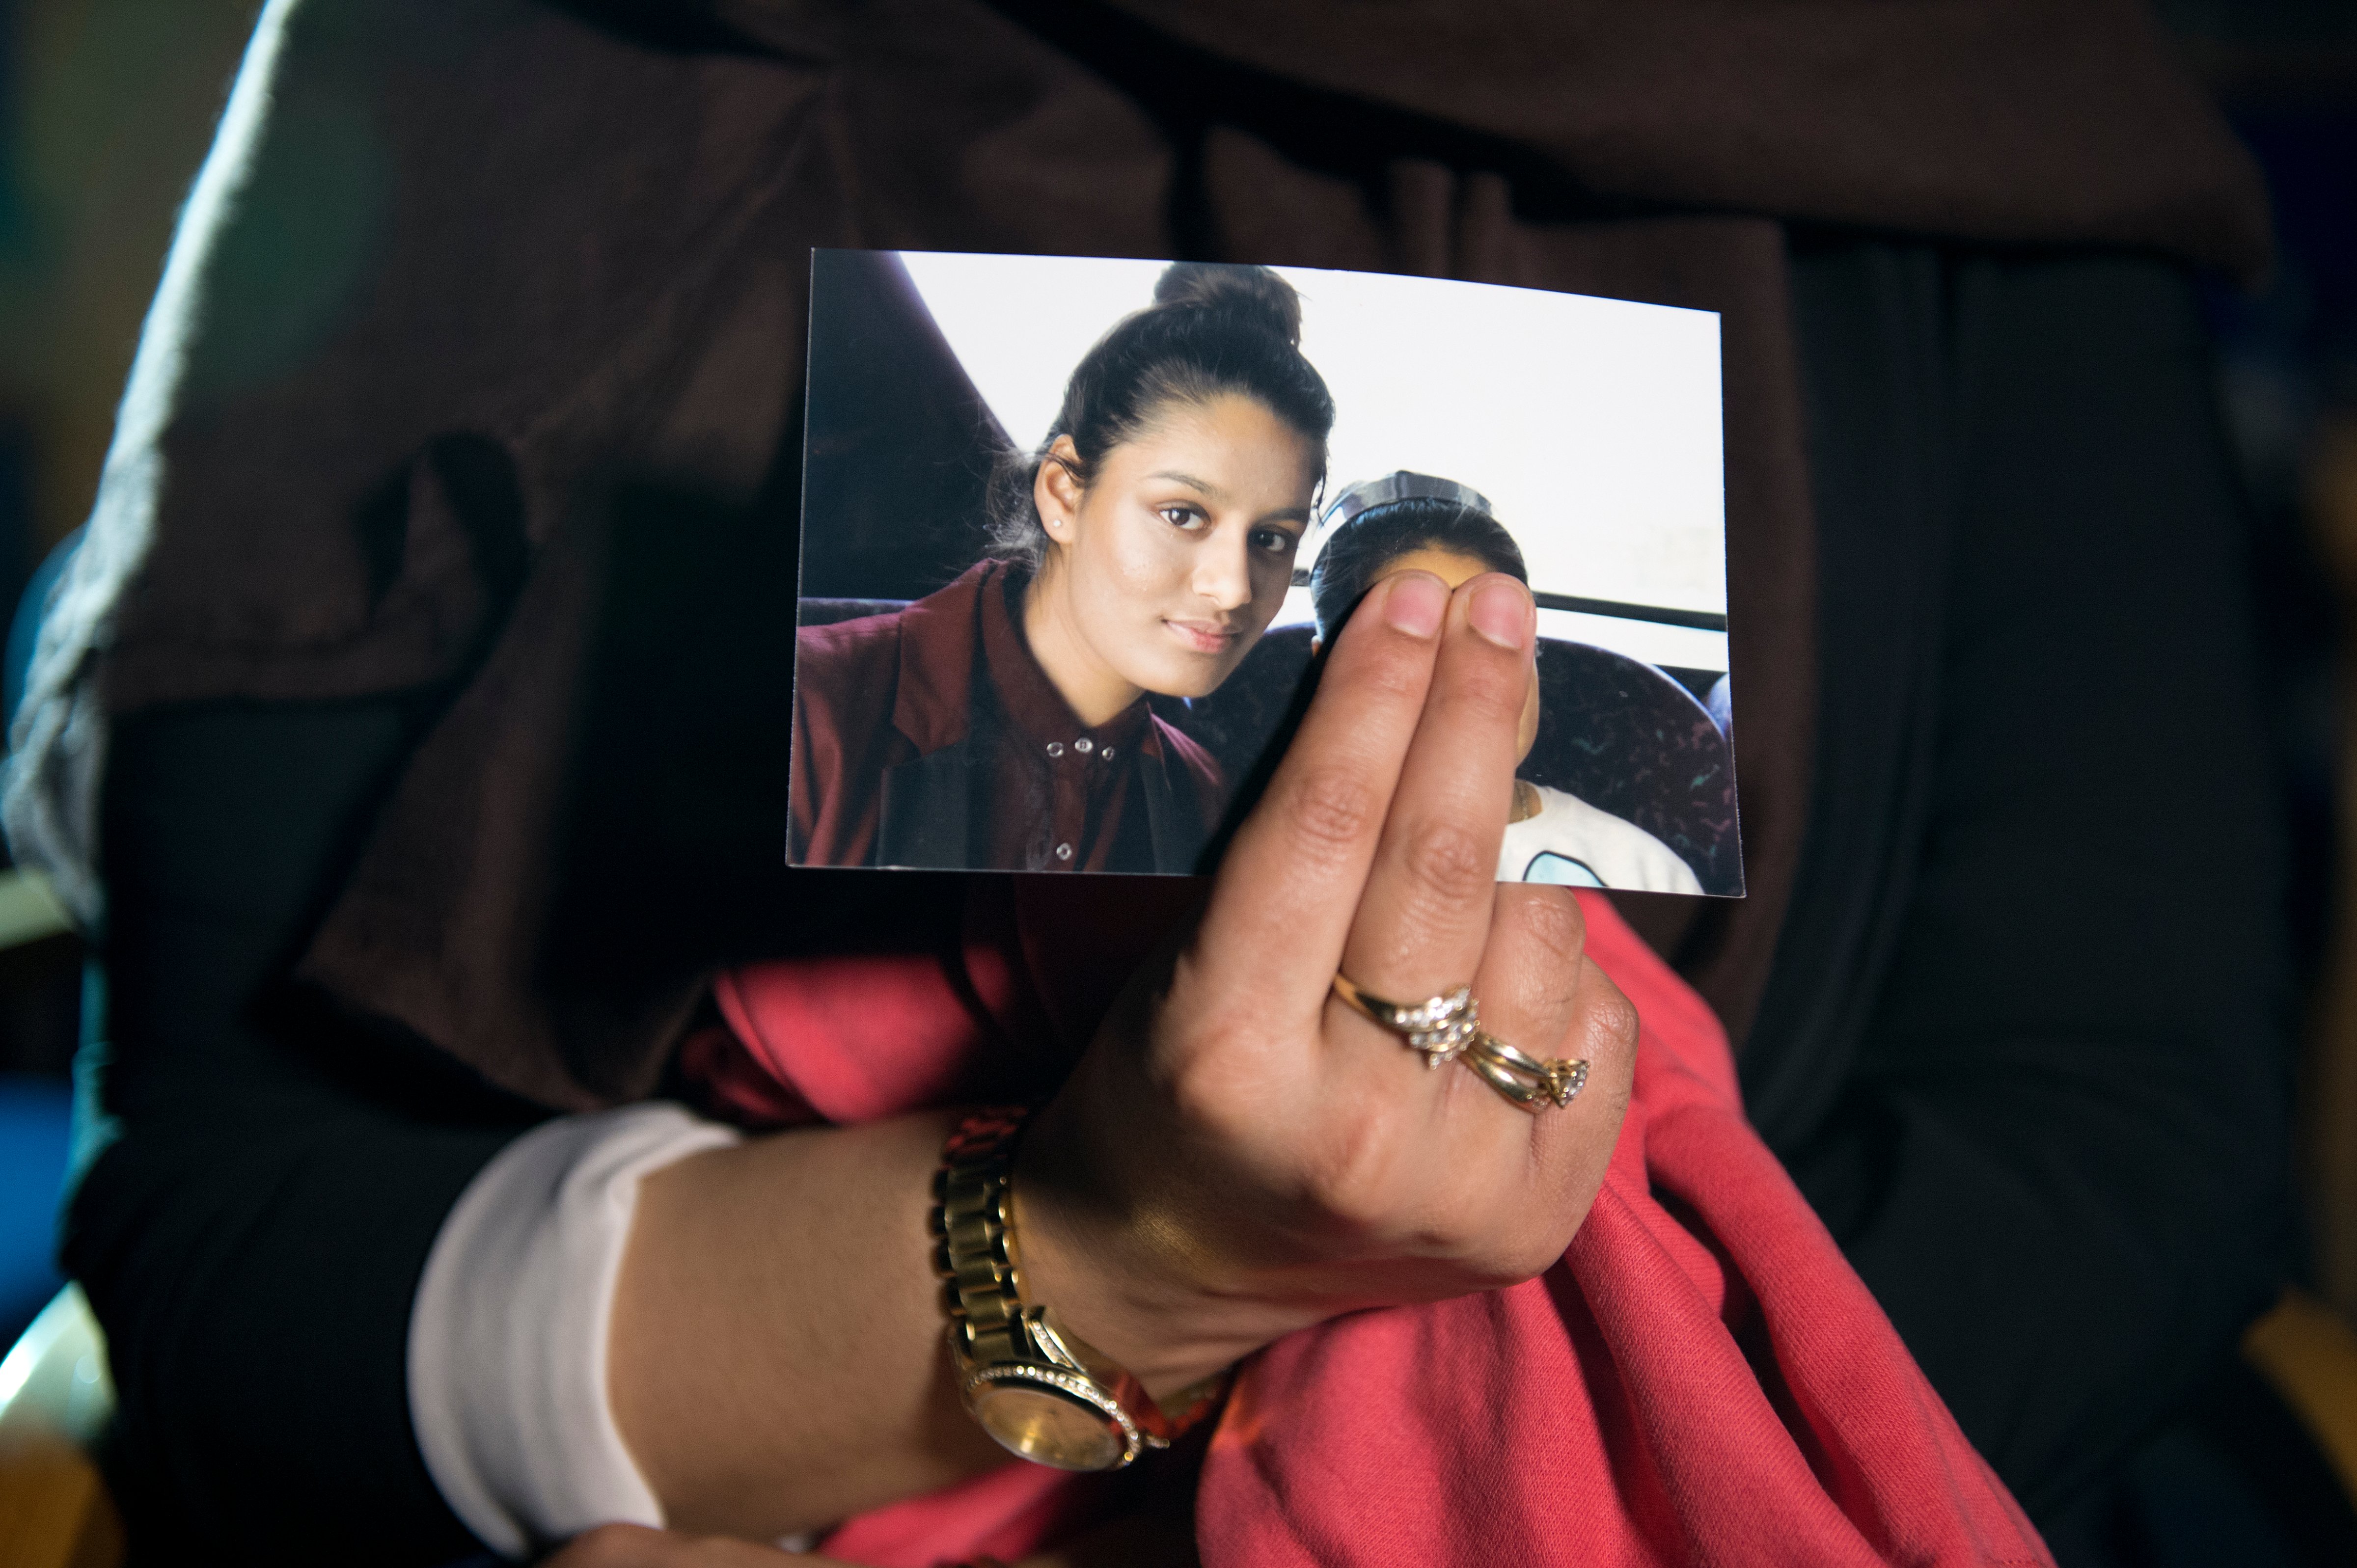 Renu Begum holds a photo of her sister, Shamima Begum, 15, believed to have fled to Syria to join Islamic State. February 22, 2015 in London, England. (WPA—Getty Images)